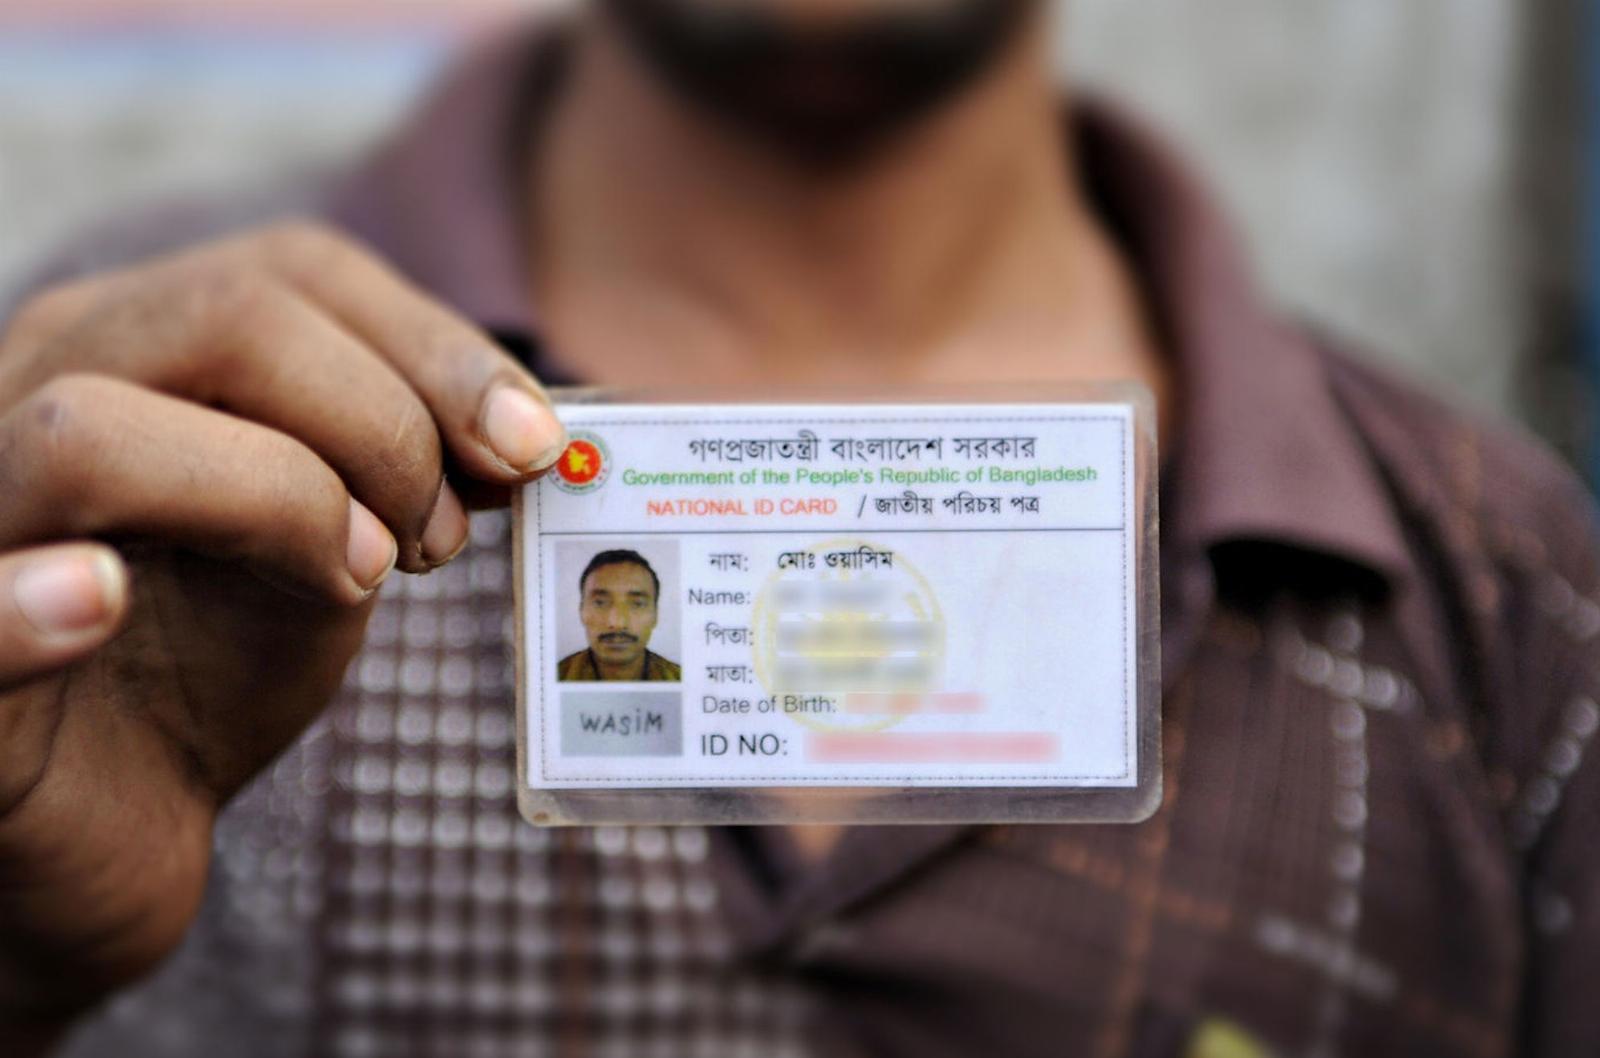 Bangladesh government takes down exposed citizens’ data